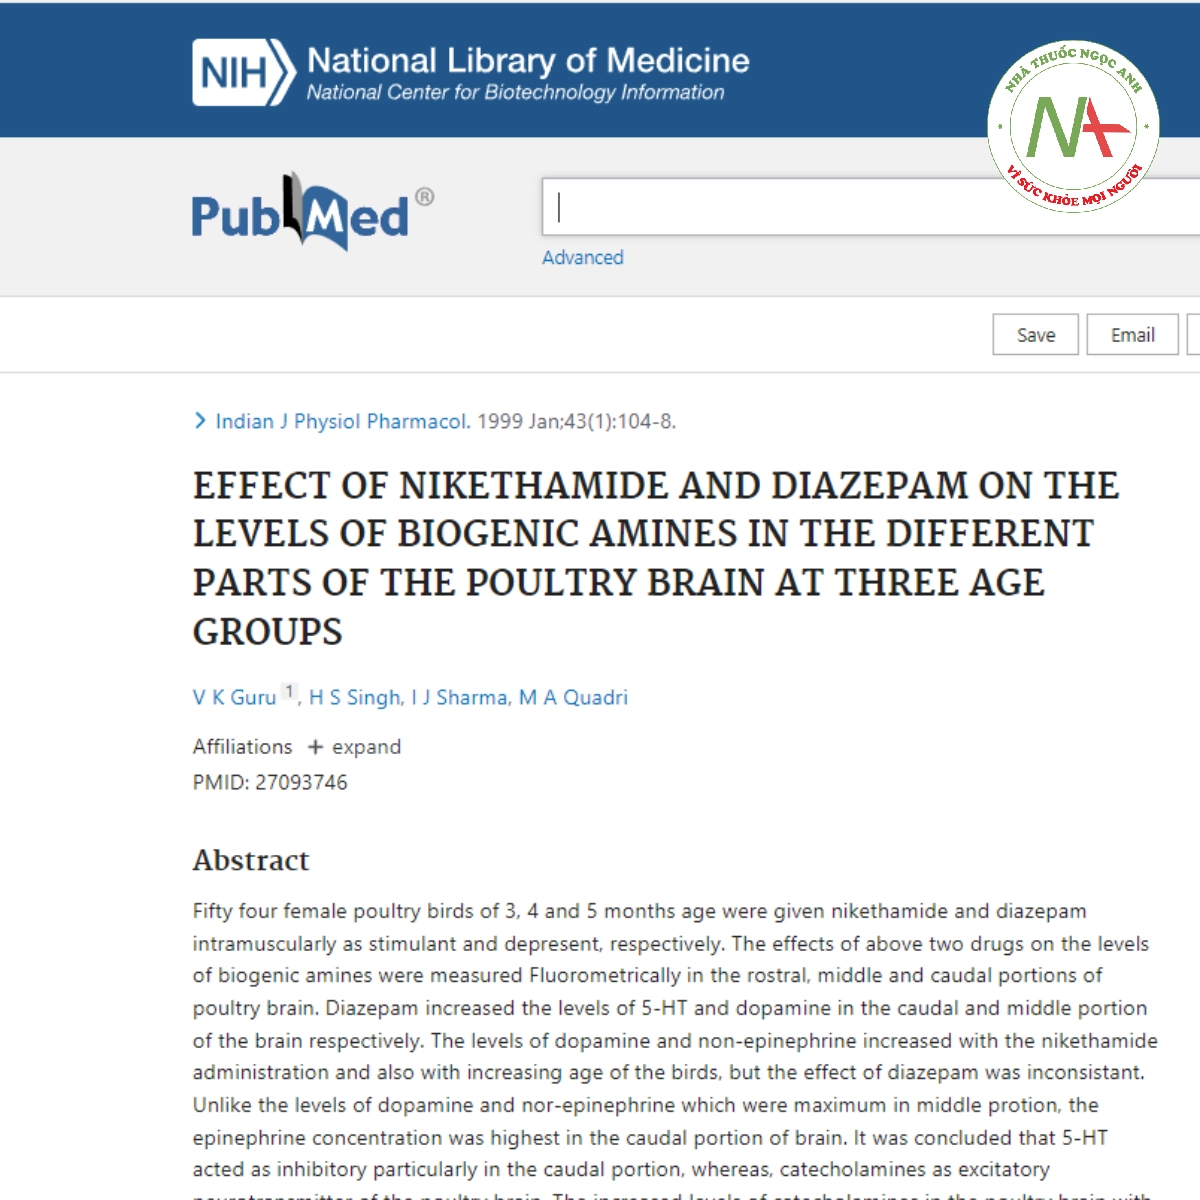 EFFECT OF NIKETHAMIDE AND DIAZEPAM ON THE LEVELS OF BIOGENIC AMINES IN THE DIFFERENT PARTS OF THE POULTRY BRAIN AT THREE AGE GROUPS